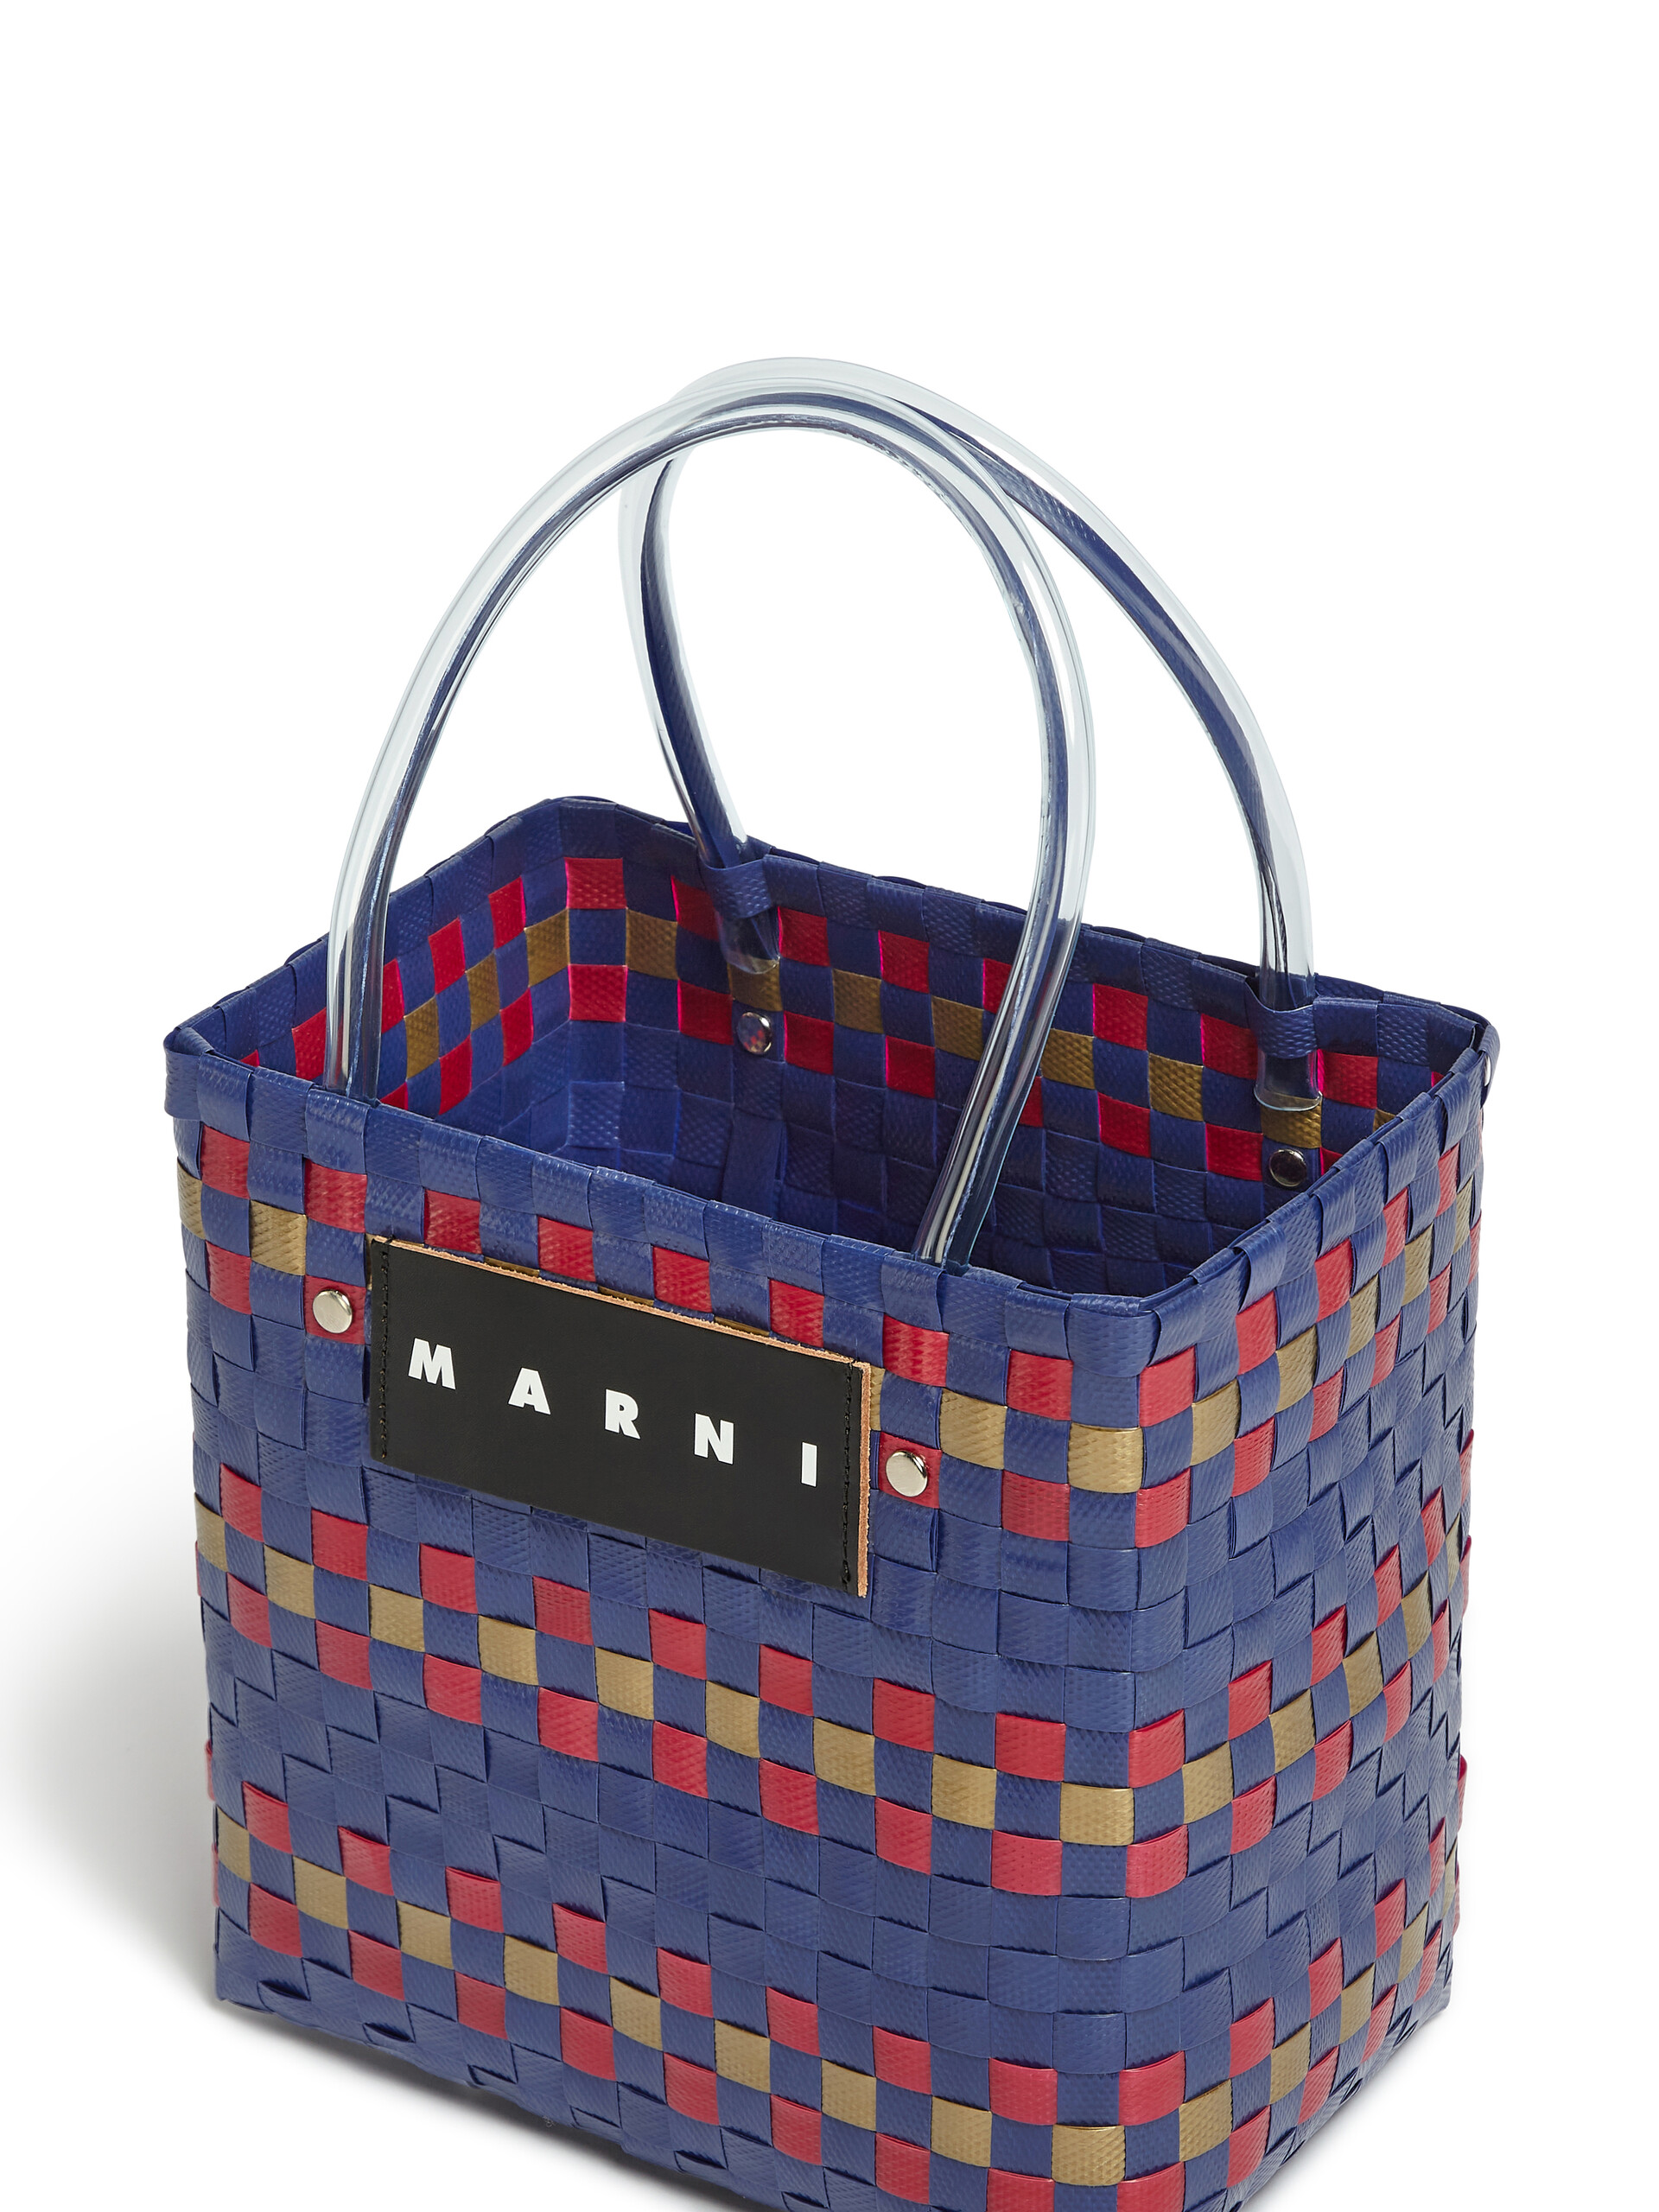 MARNI MARKET BASKET bag in blue woven material - Shopping Bags - Image 4